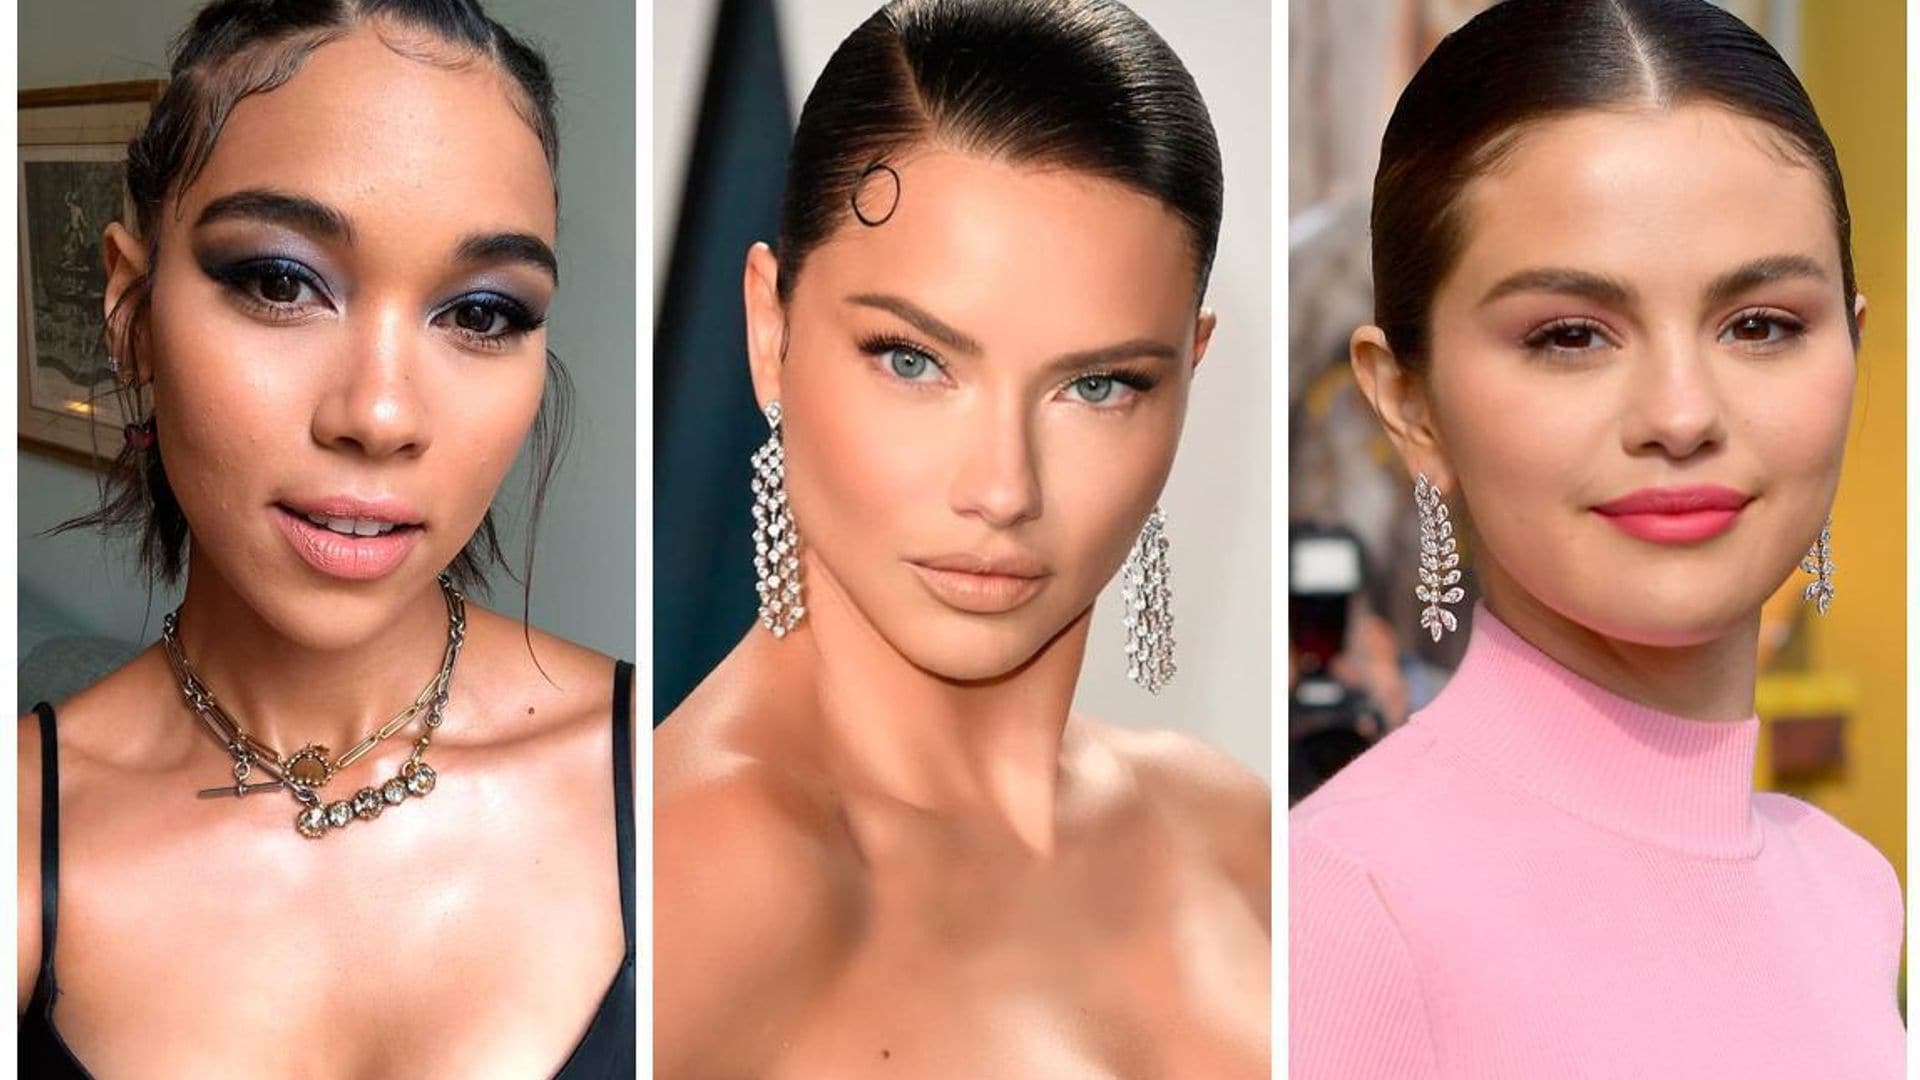 Models and actresses can't resist baby hair